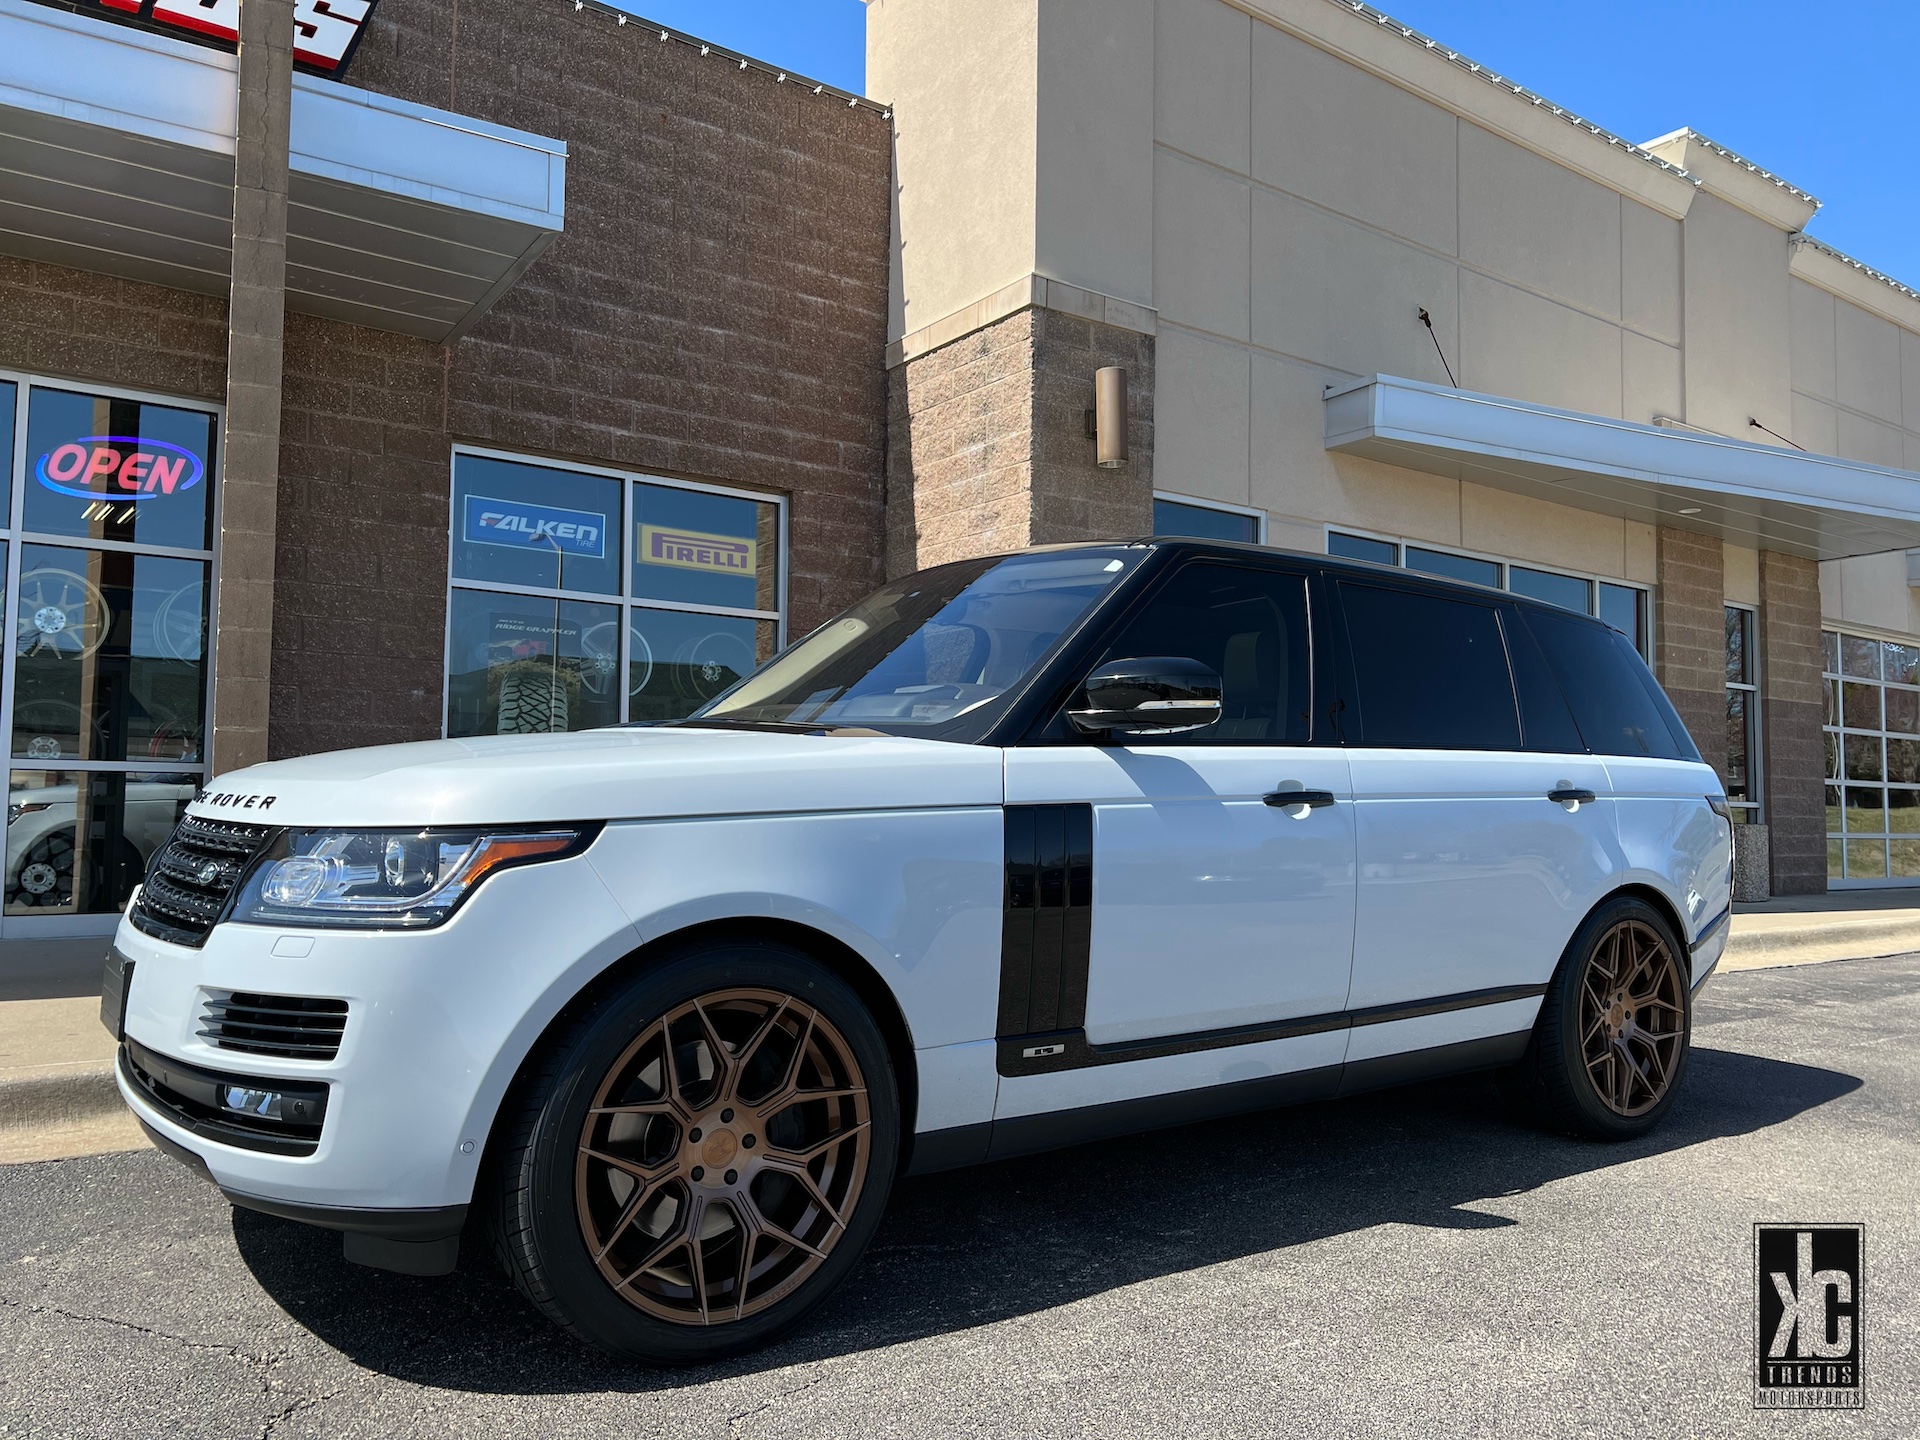  Land Rover Range Rover with 